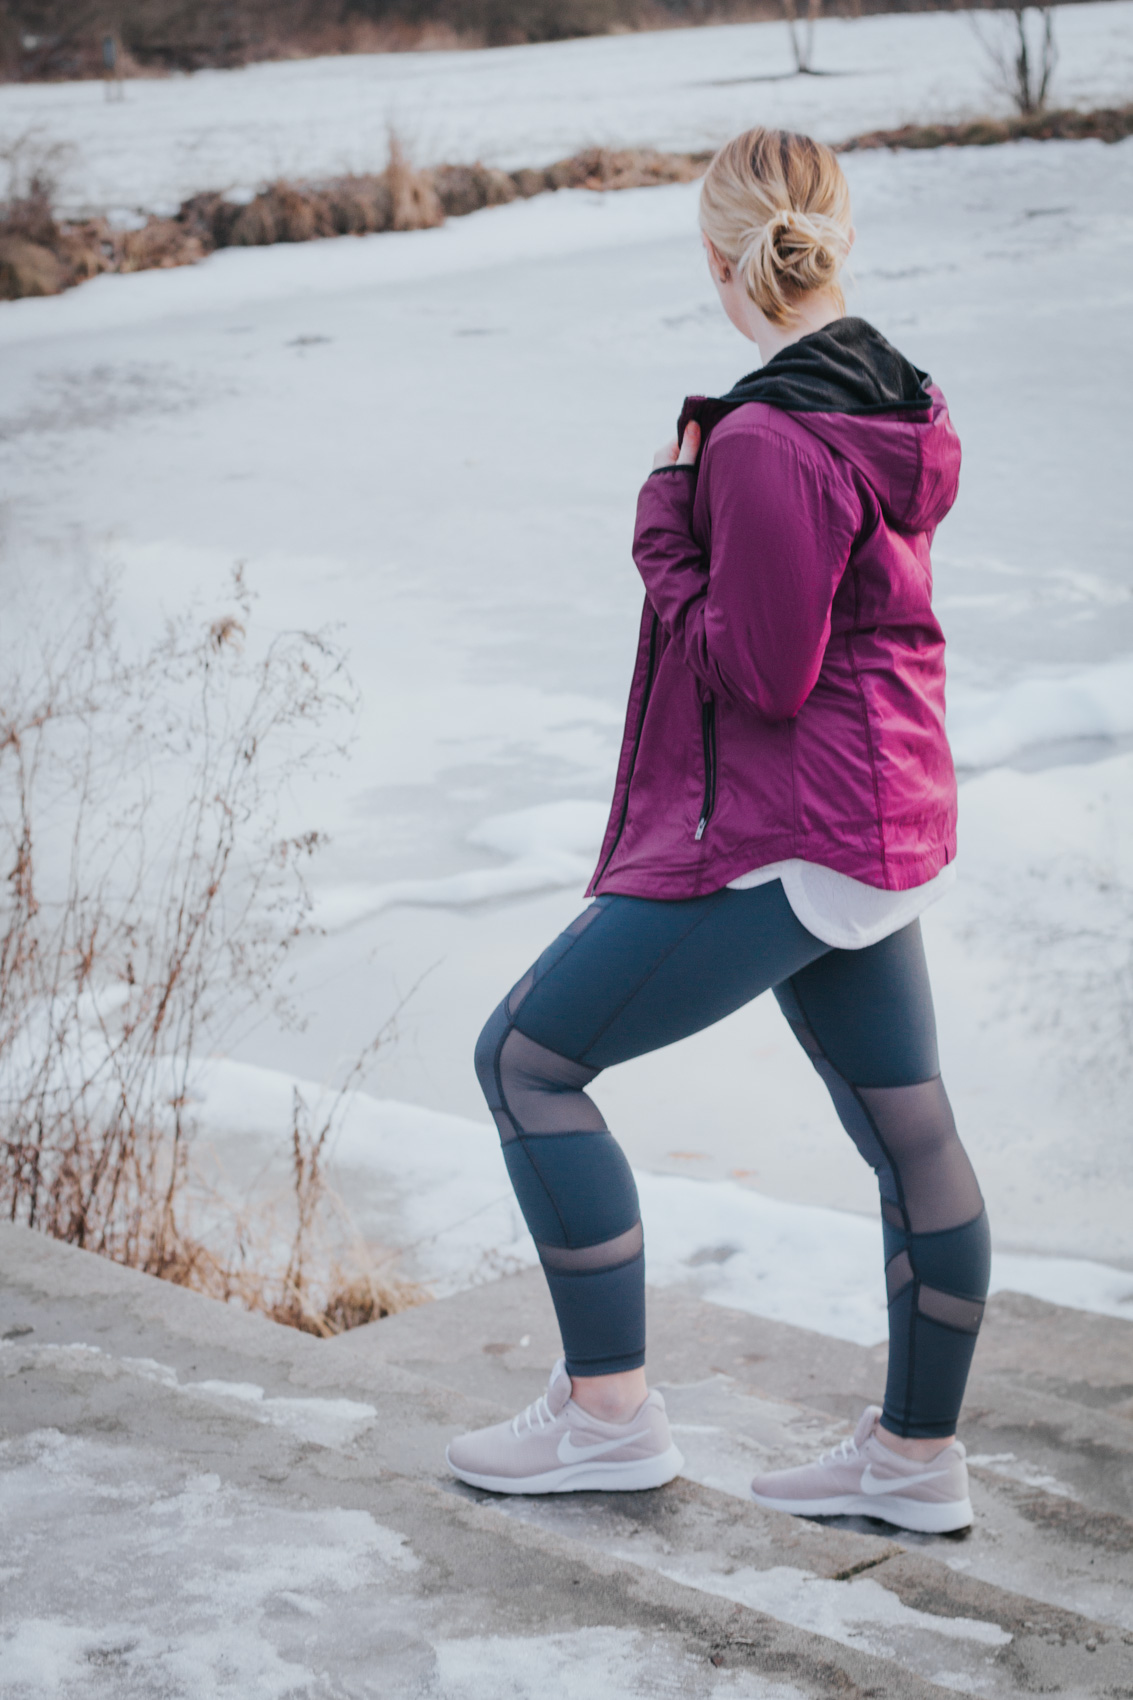 Lifestyle blogger, Allyn Lewis of The Gem, styles a winter workout look with a purple Columbia Sportswear jacket and CALIA by Carrie Underwood leggings.